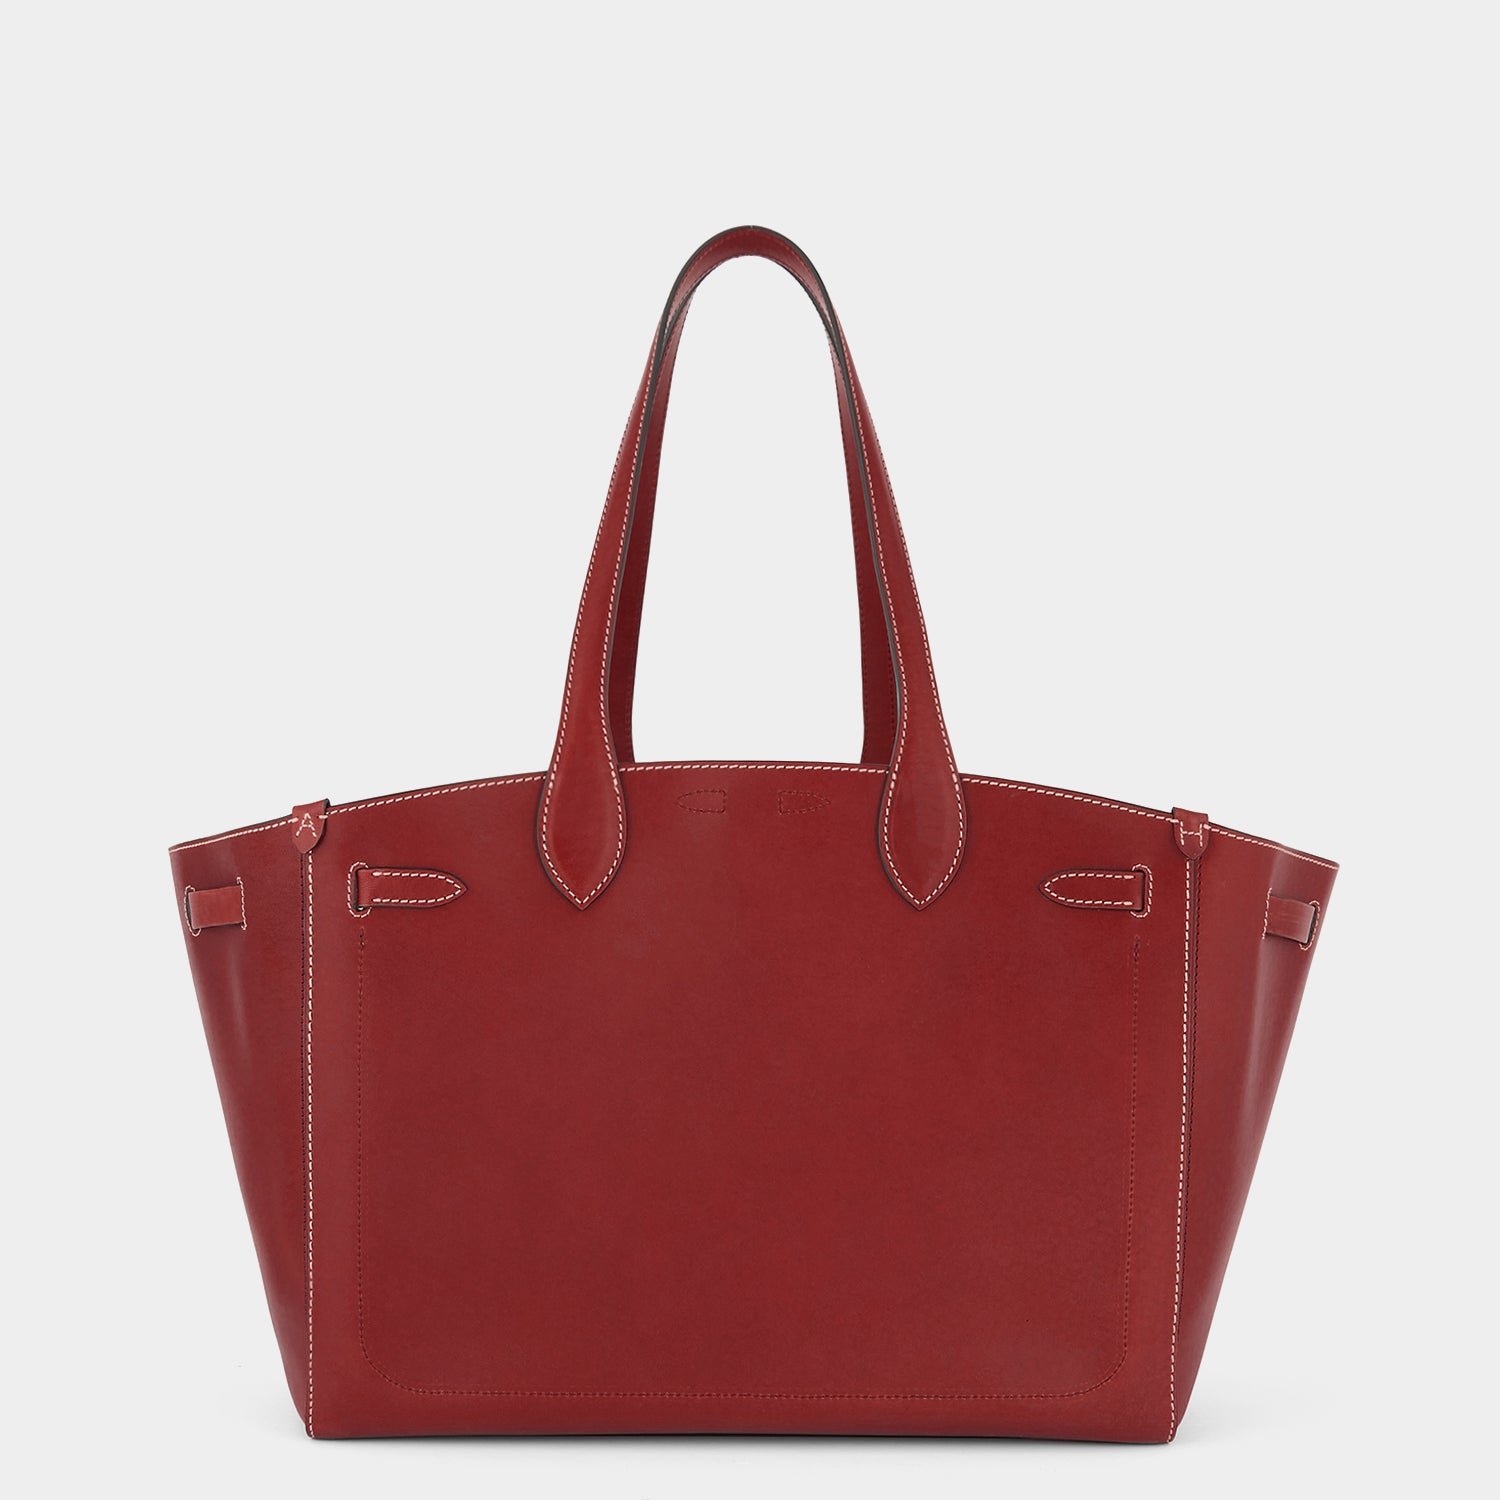 Return to Nature Tote -

                  
                    Compostable Leather in Rosewood -
                  

                  Anya Hindmarch UK
